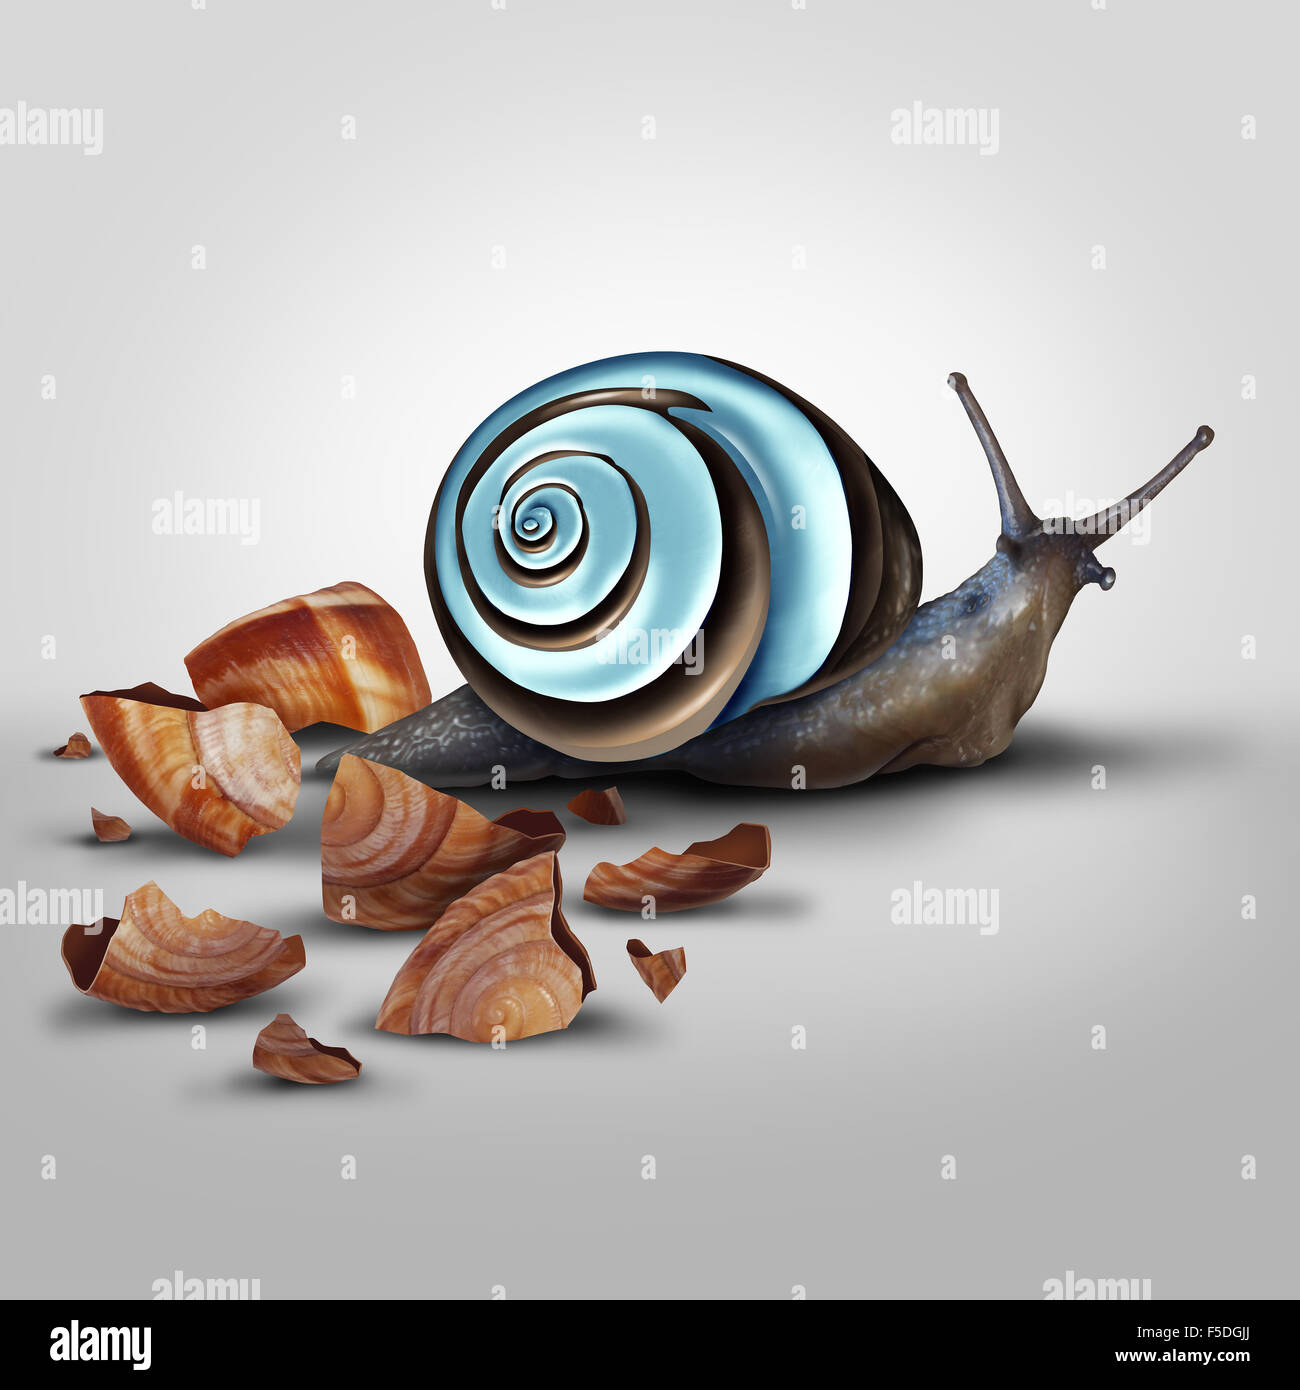 Improvement concept as a snail Shedding old shell for an upgrade as a modern chrome one as a metaphor for new and improved and adapting and advancing with new technology. Stock Photo